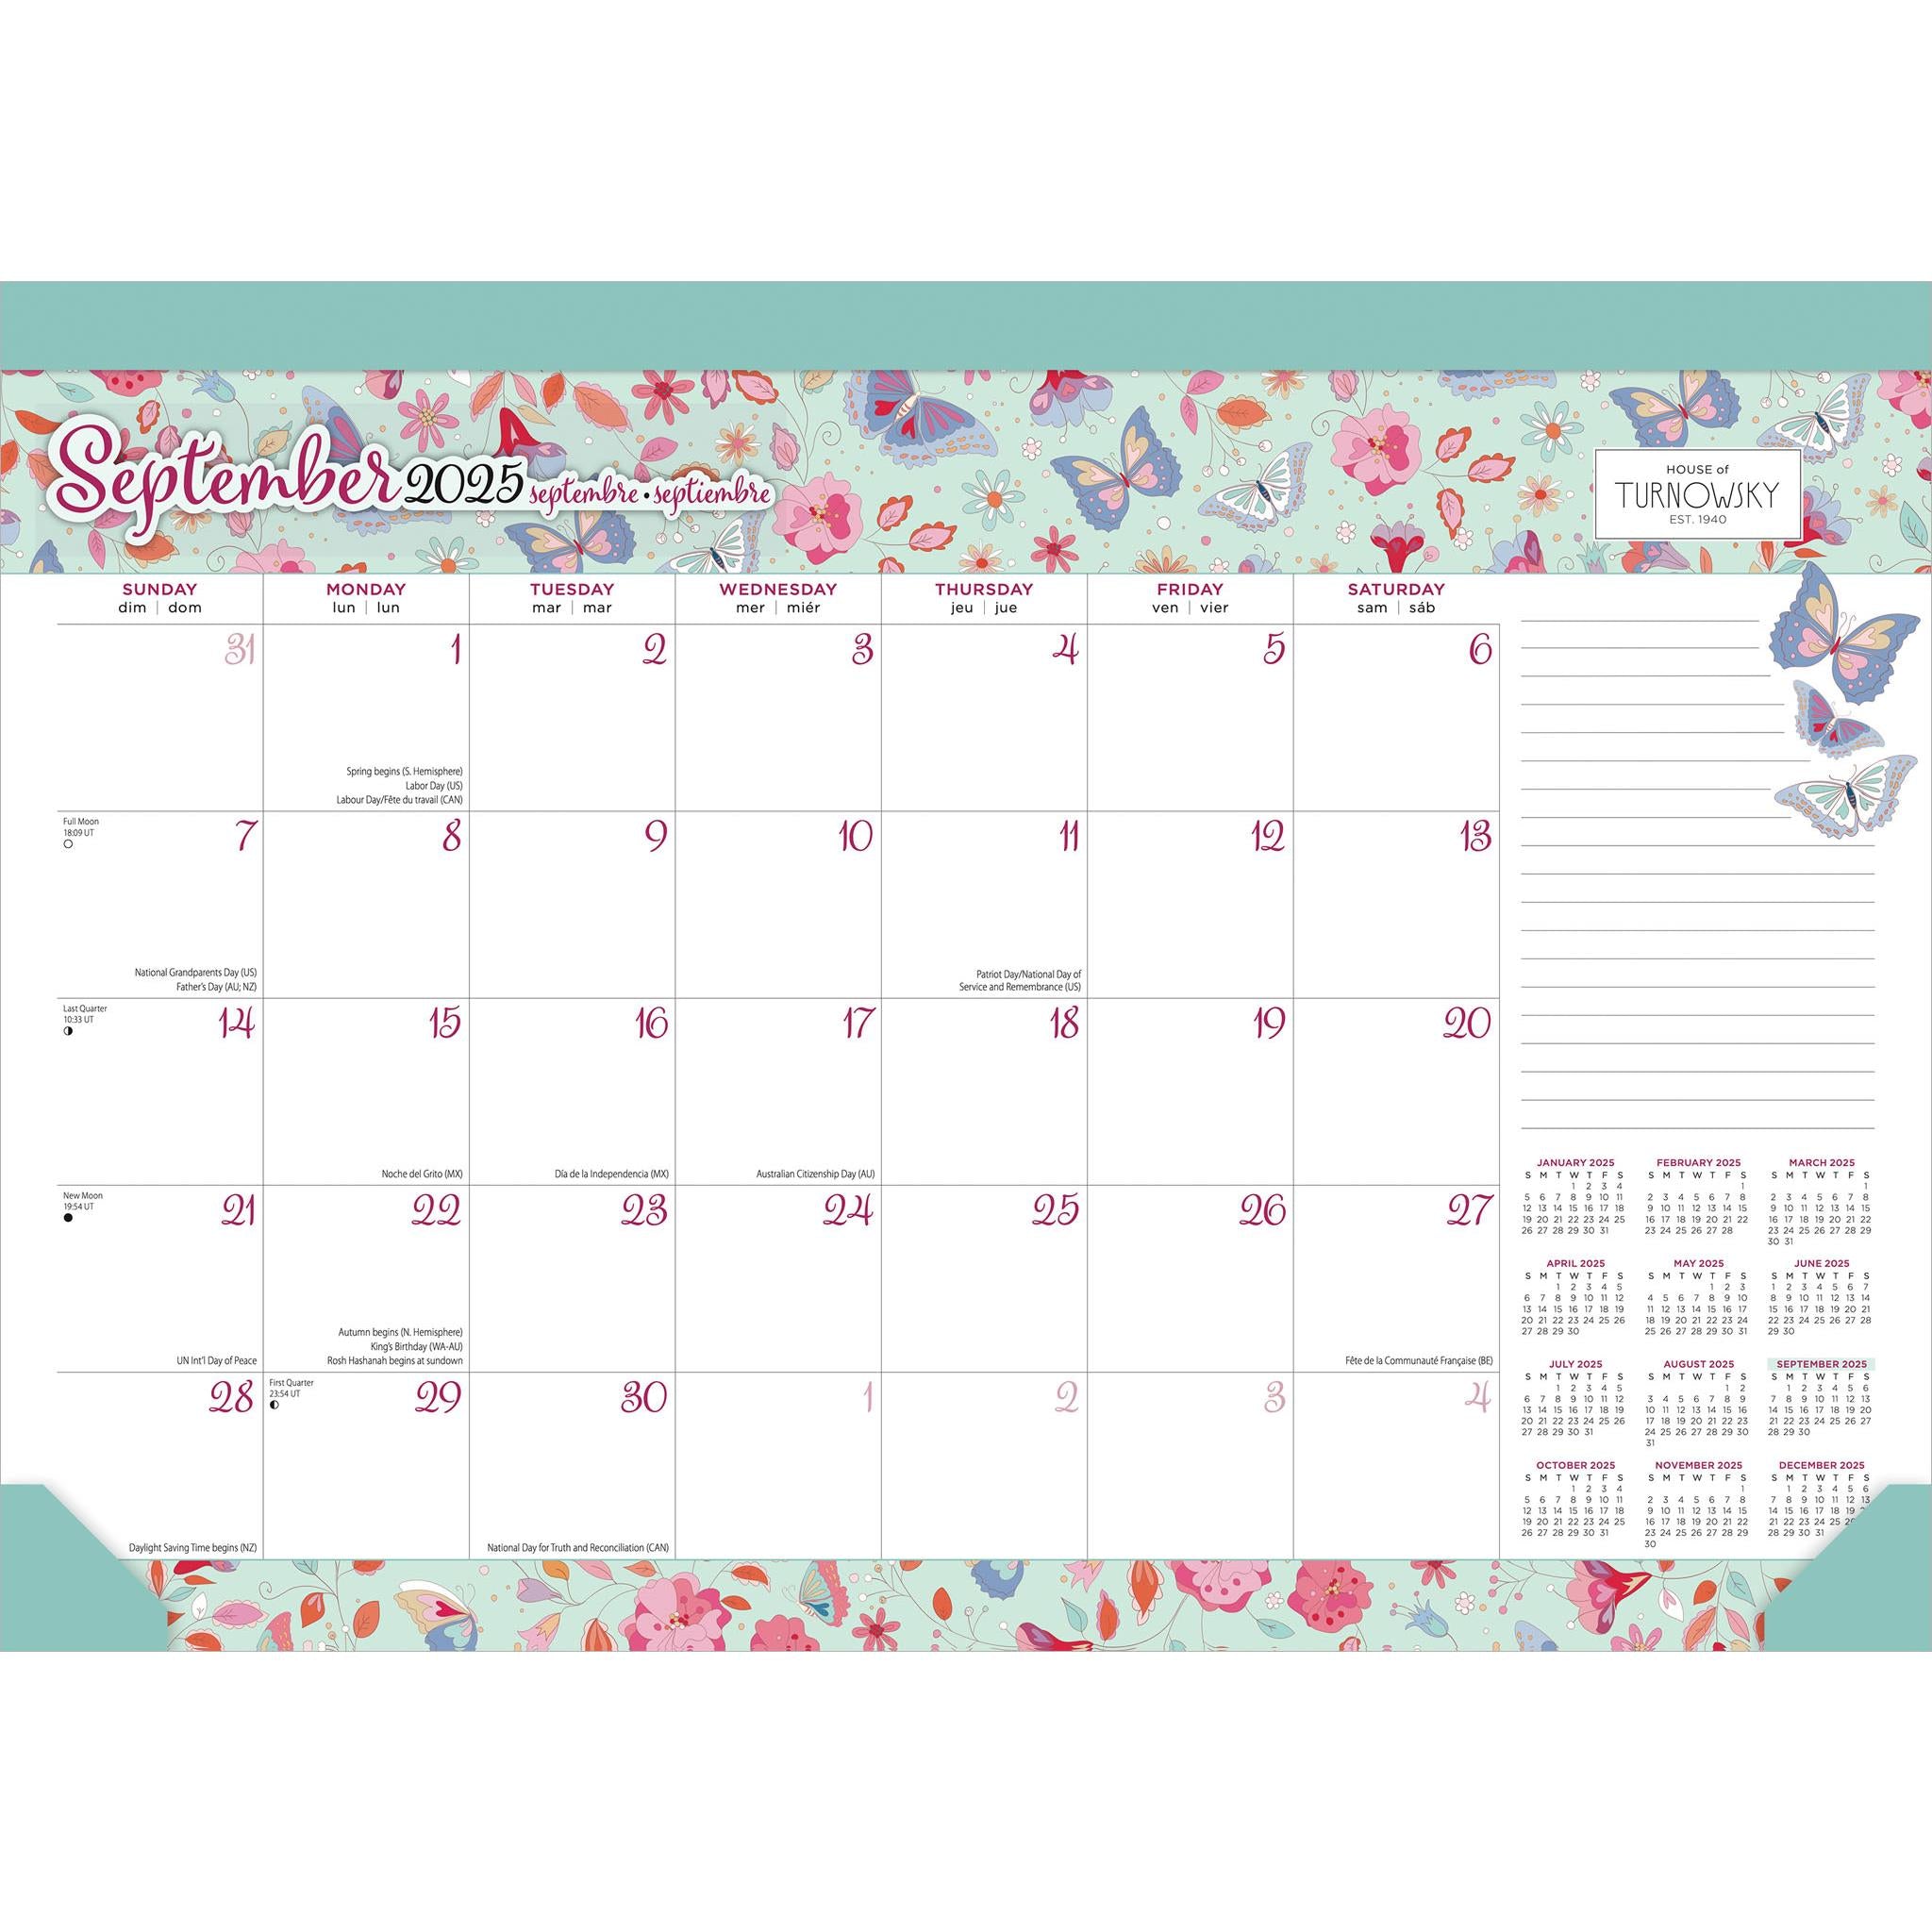 Turnowsky House Of Abstract Allure Desk Pad 2025 Calendar